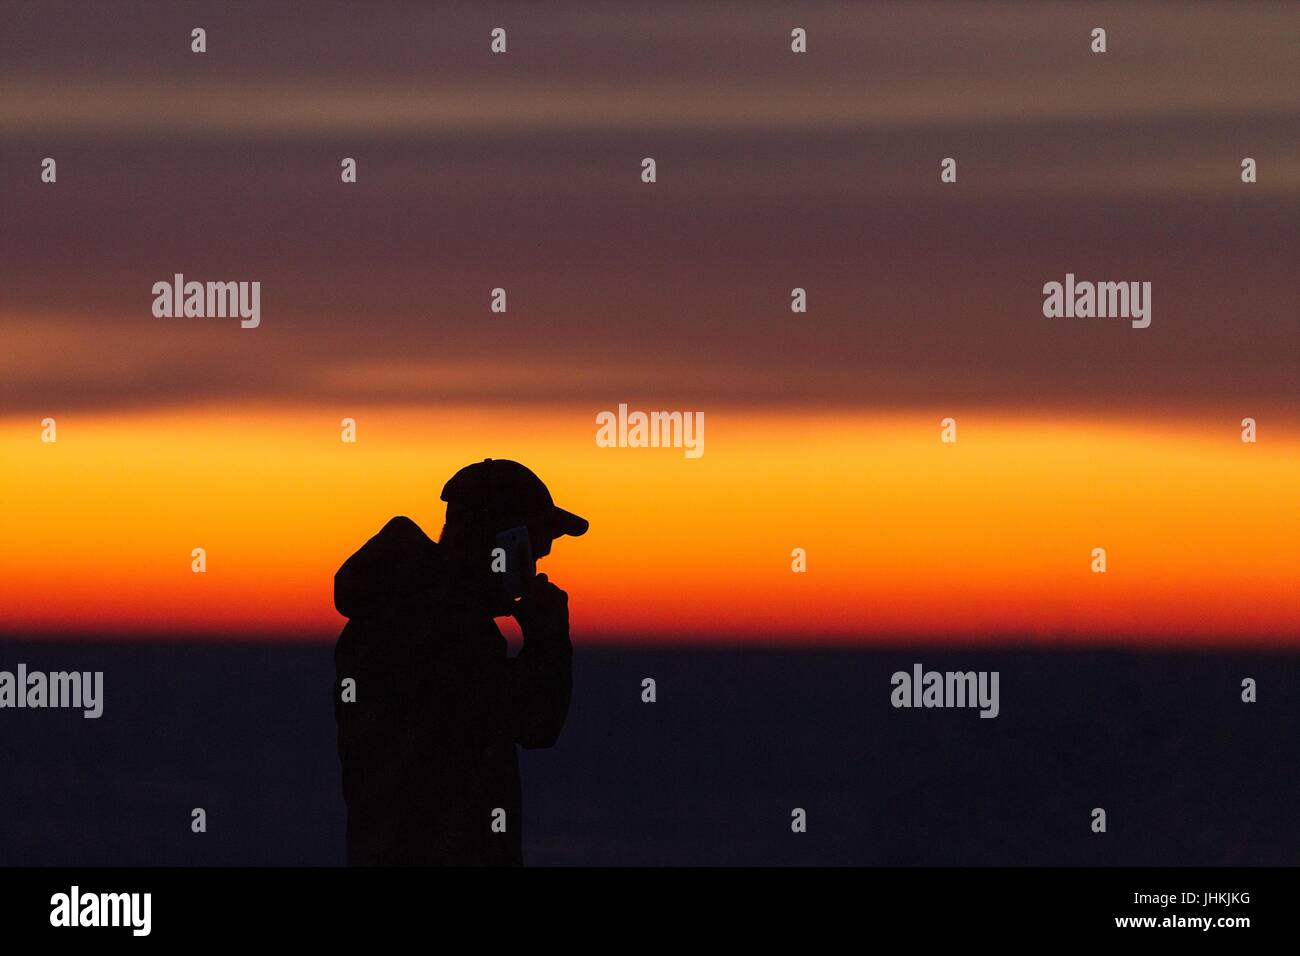 Silhouette of the man with mobile/cellphone during sunset at the seaside. Man in a baseball cap. Stock Photo